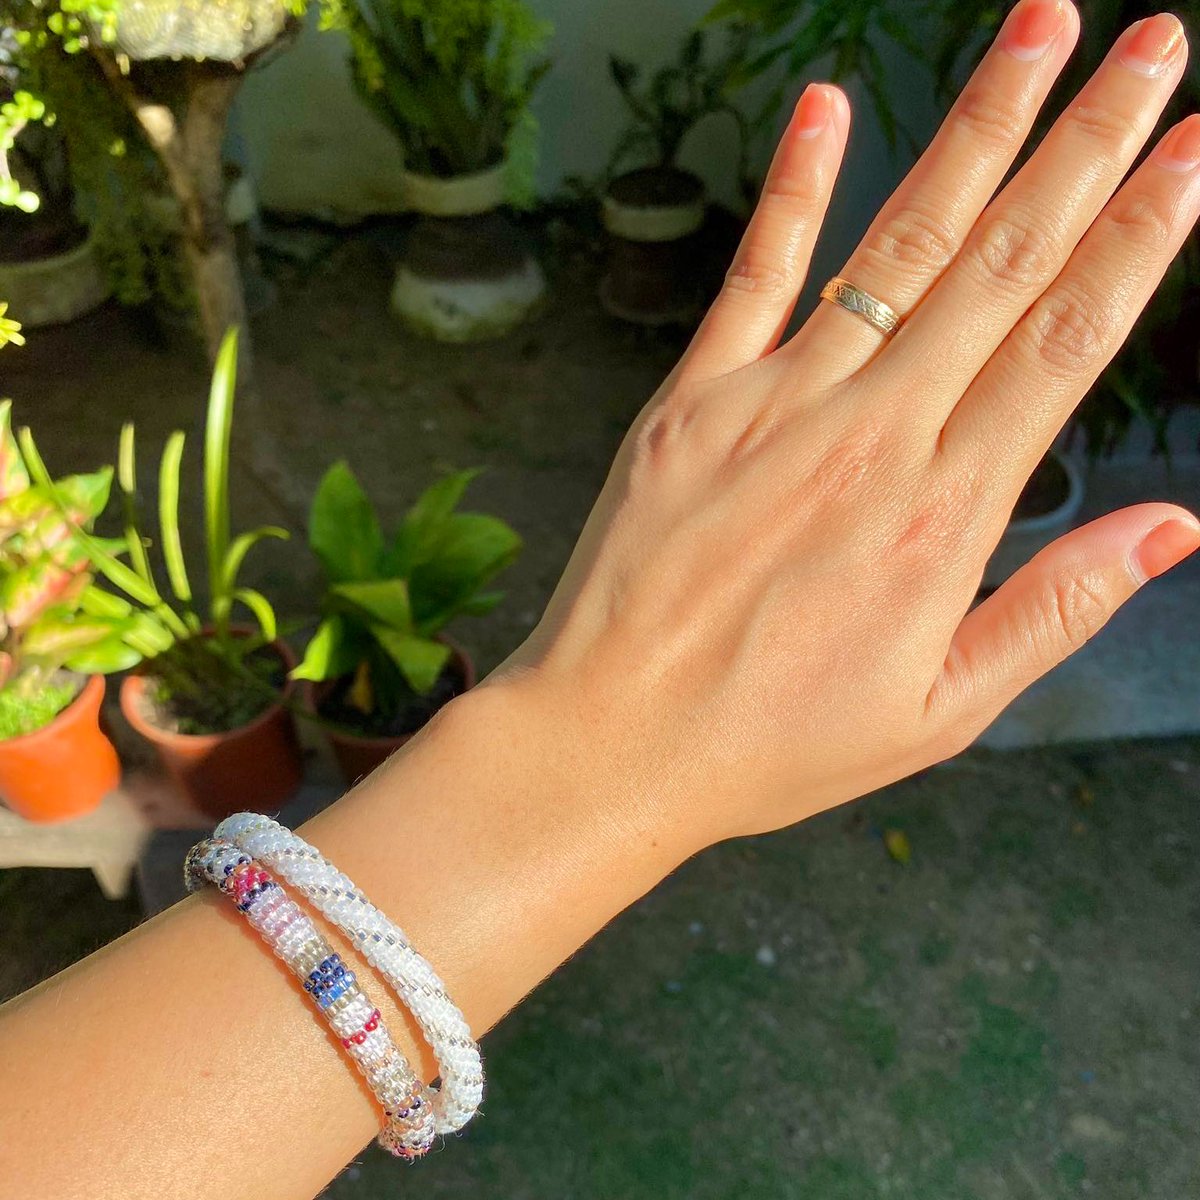 Let your soul be happy and your heart be light.🤍🌞

sashkaco.com/collections/new

#SashkaCo #handmade #beadedjewelry #bracelets #fashion #trends #springstyle #accessories #giftideas #womenjewelry #shopnow #smallbusiness #alwayspositivevibes #Florida #CA #USA